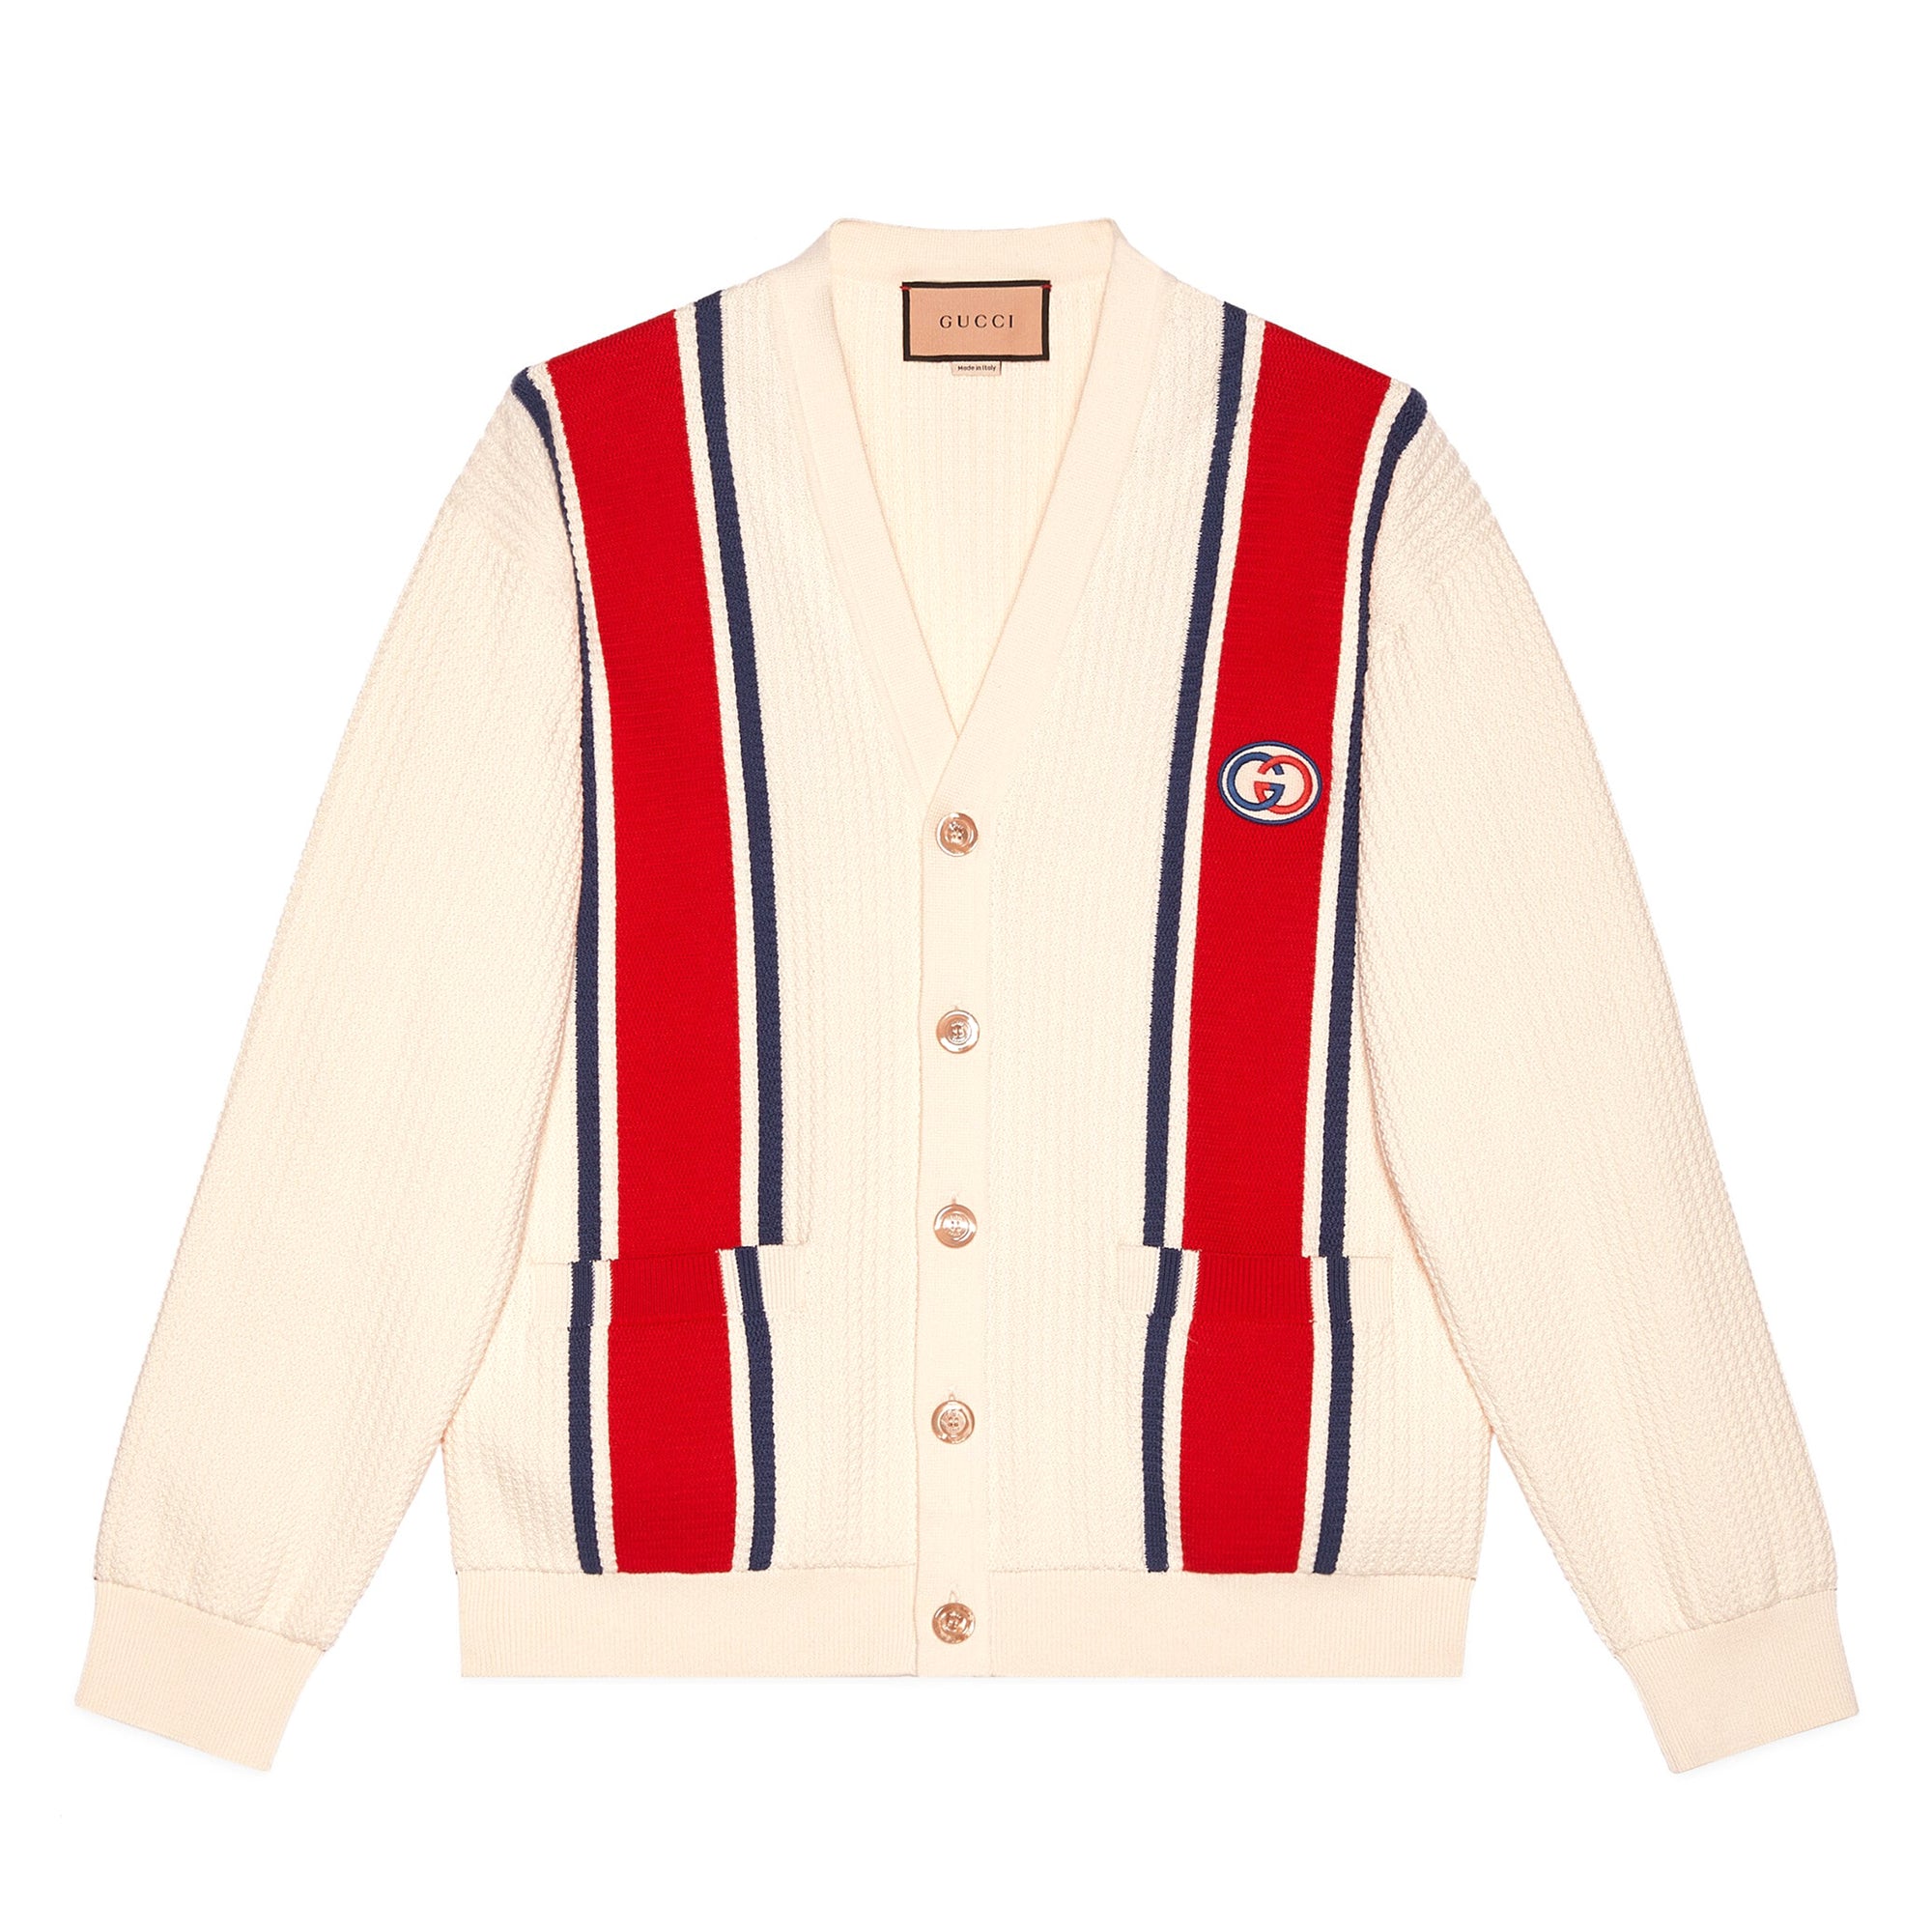 Gucci - Men’s Knit Cardigan With Patch - (Ivory) view 1